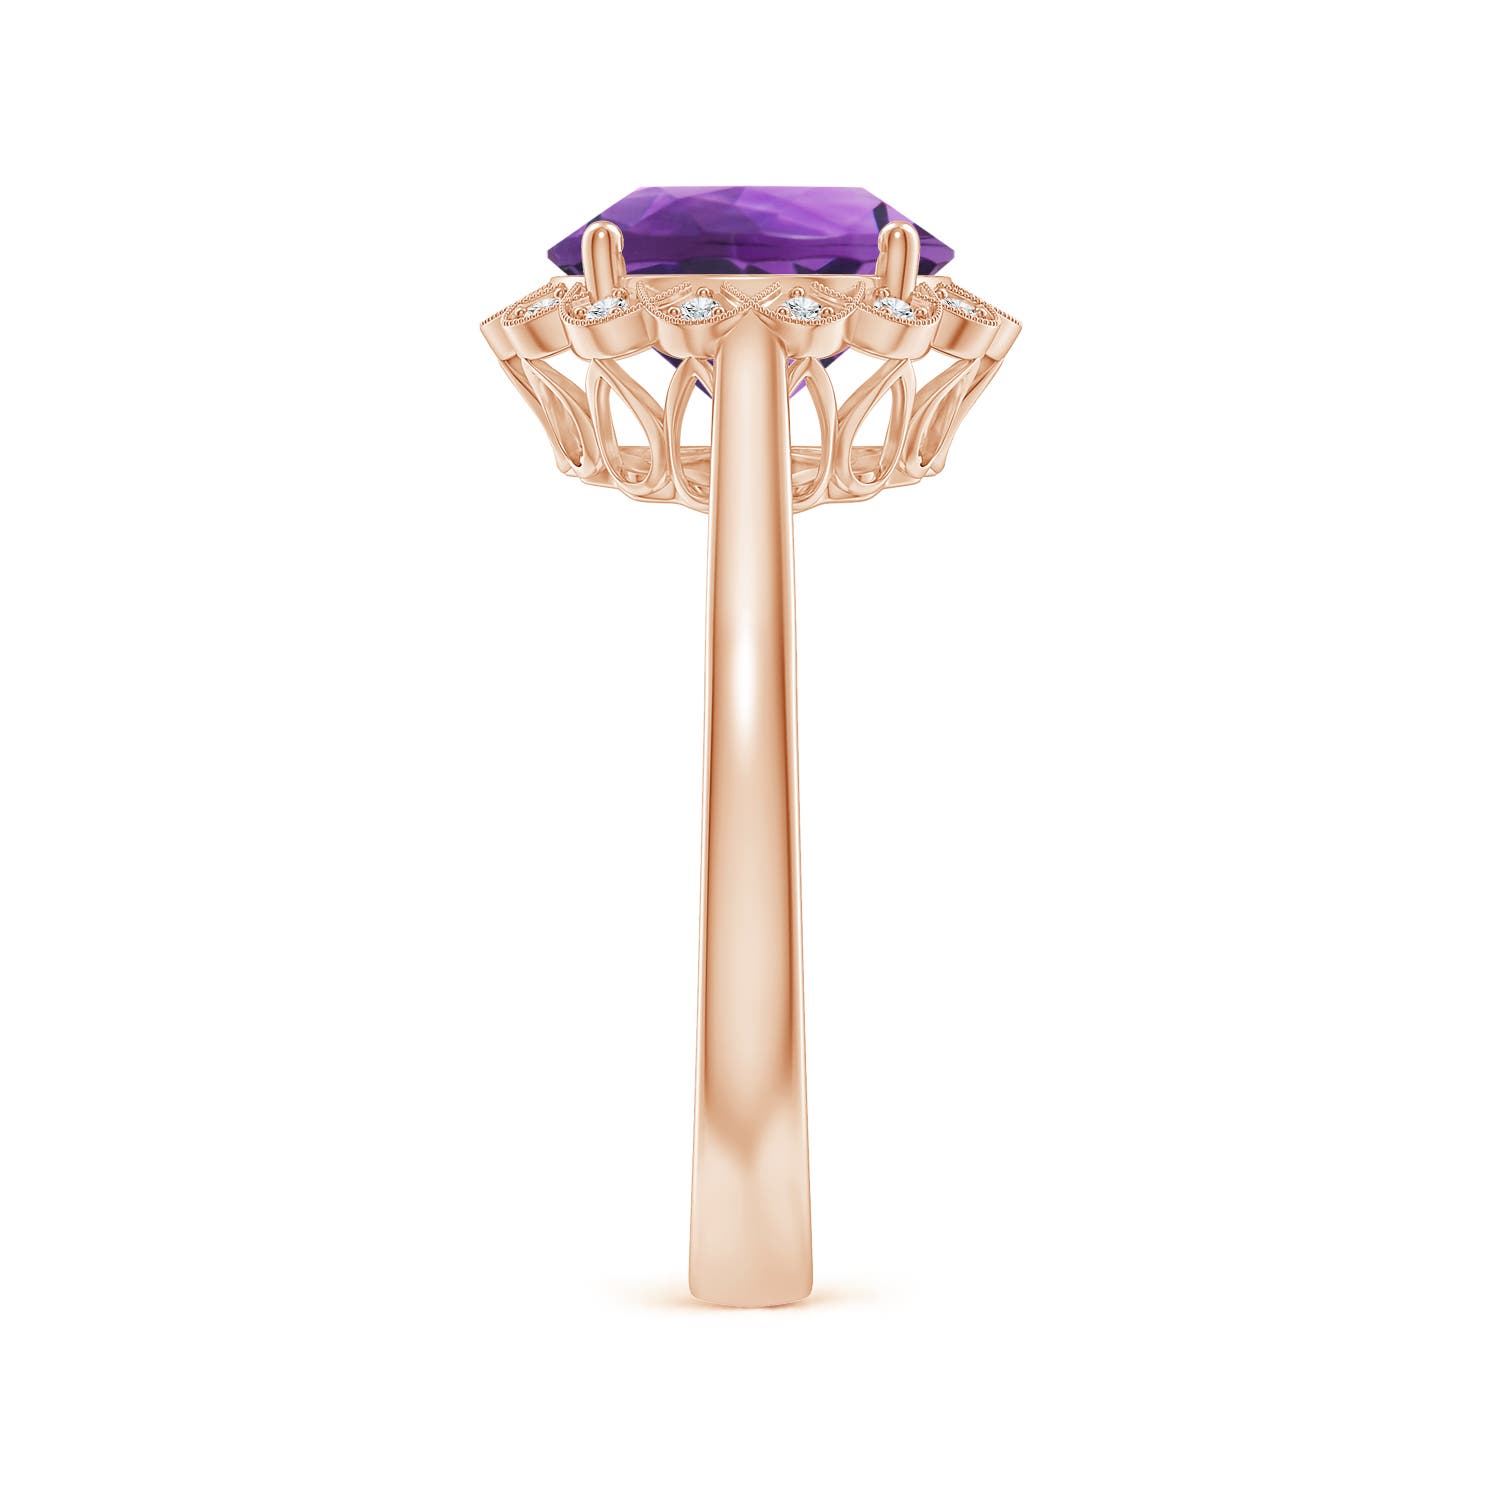 AAA - Amethyst / 2.52 CT / 14 KT Rose Gold